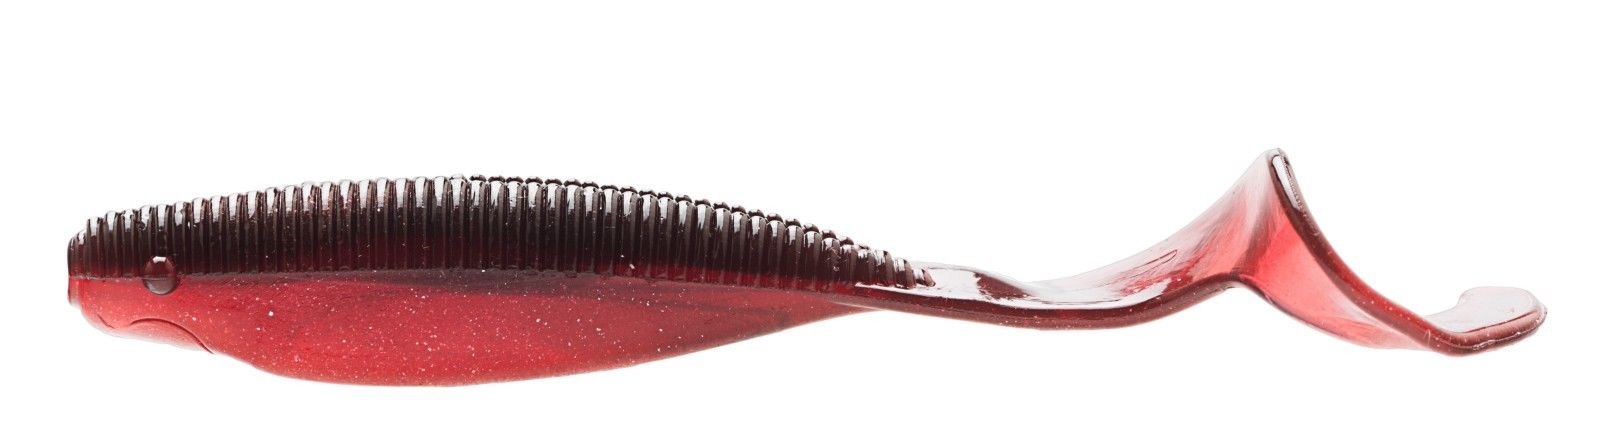 Z-Man StreakZ Curly TailZ 4 Red Shad (5 Pack)